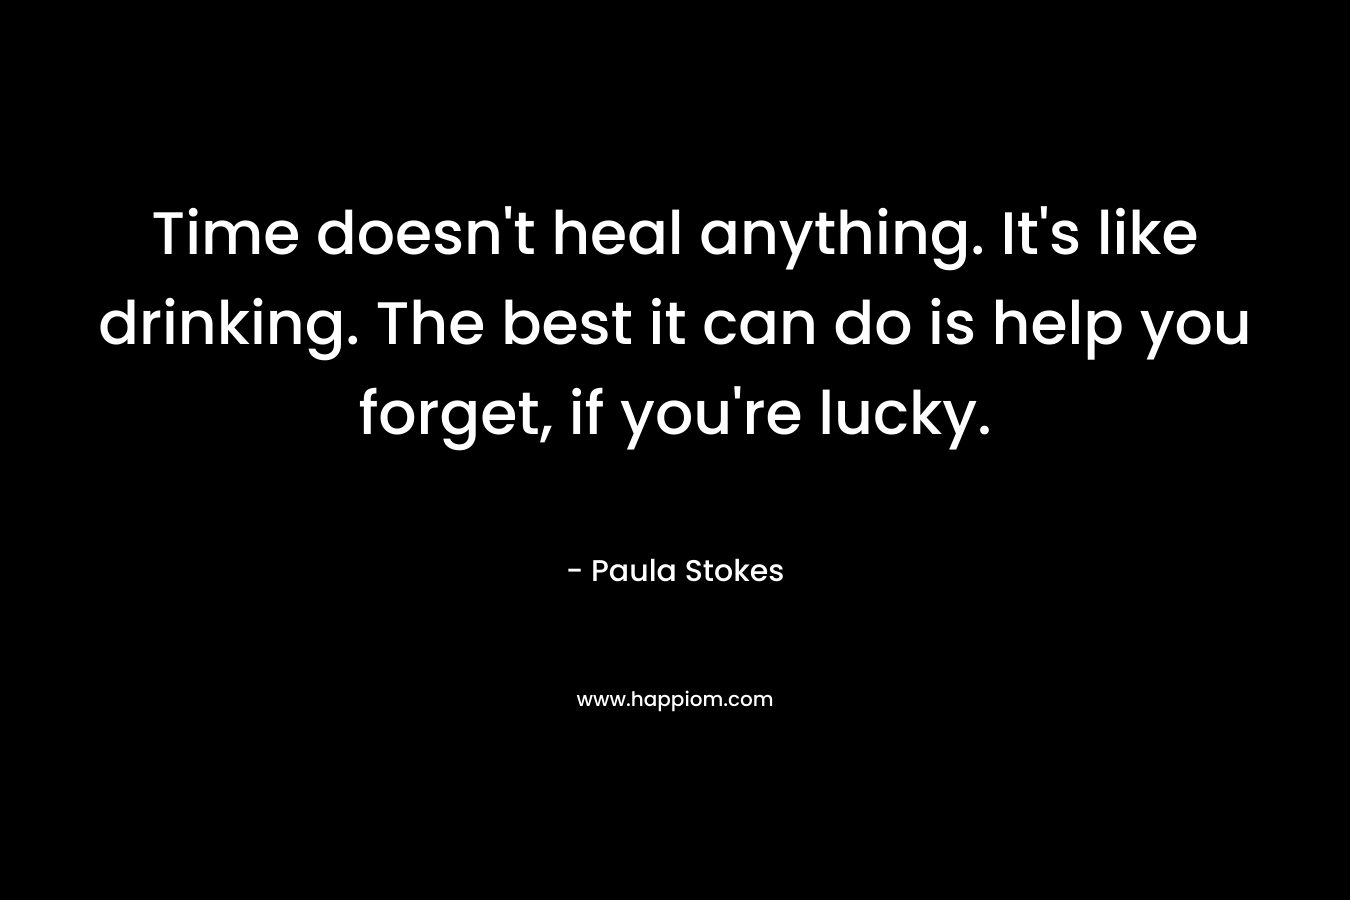 Time doesn’t heal anything. It’s like drinking. The best it can do is help you forget, if you’re lucky. – Paula Stokes